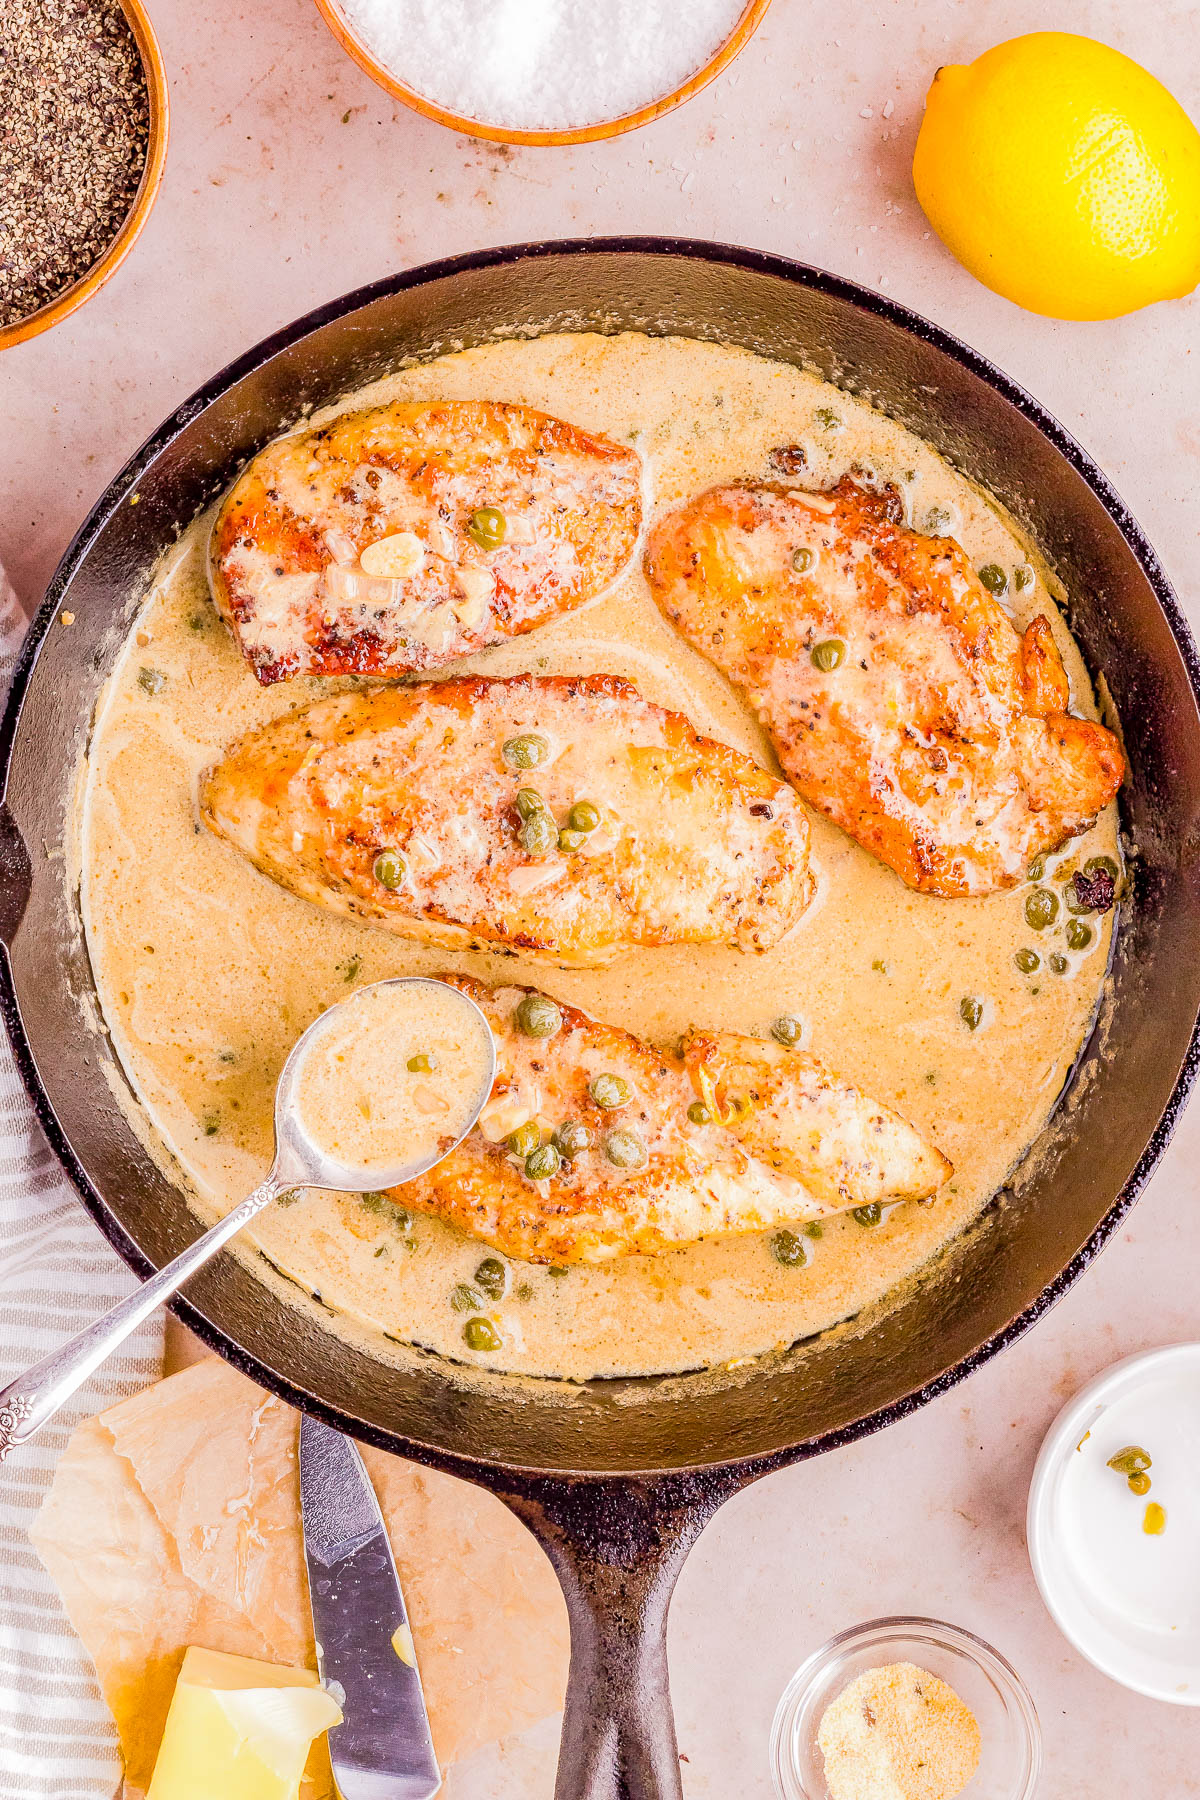 Pan-seared chicken breasts in a creamy sauce with capers, served in a cast iron skillet.